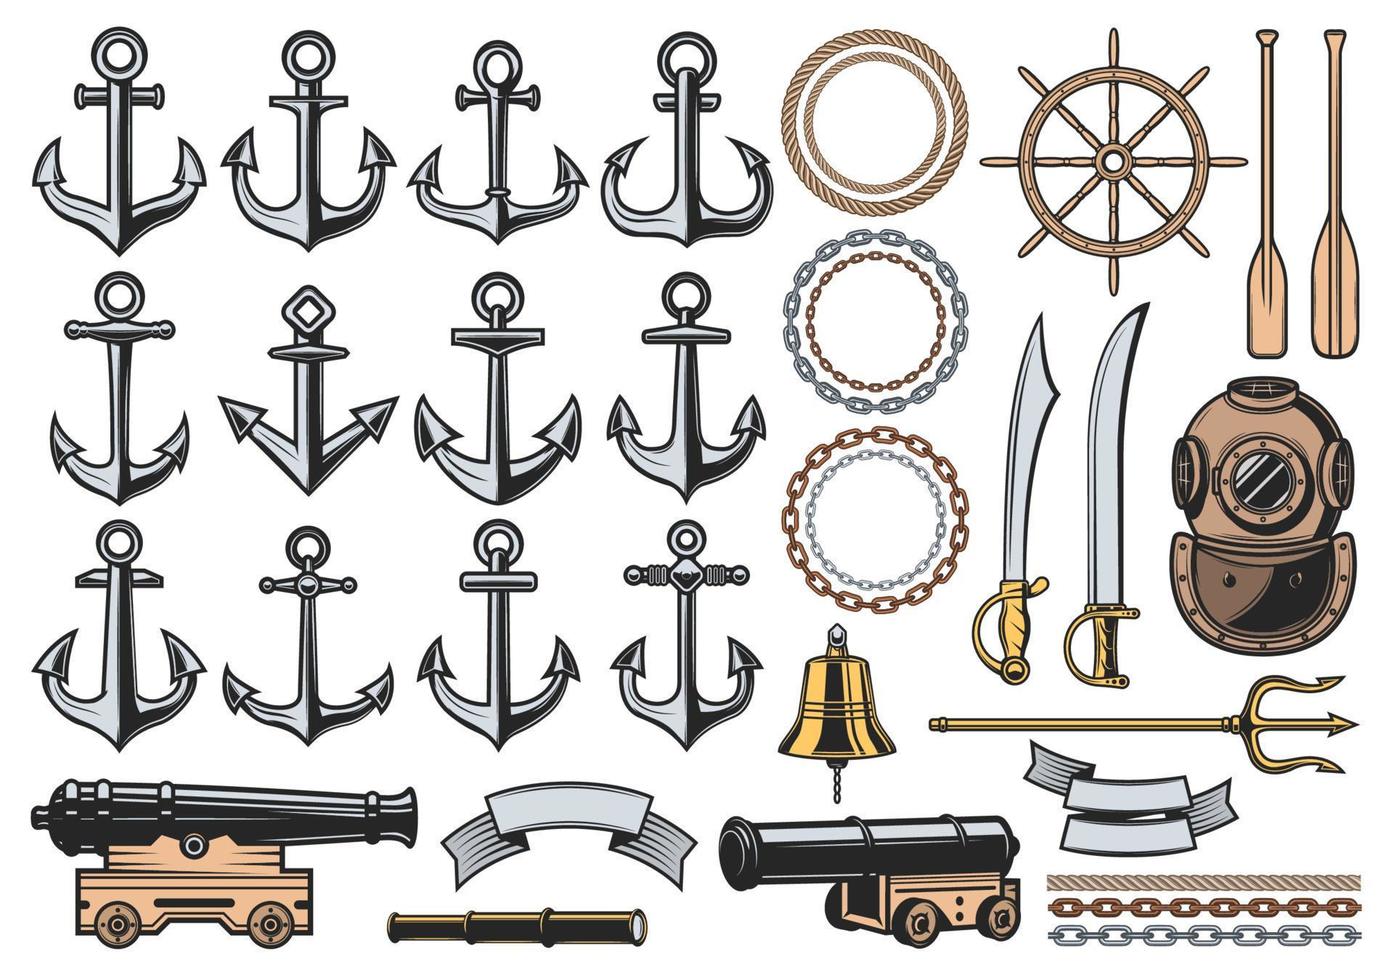 Nautical anchors, helm, ropes, chains and cannon vector